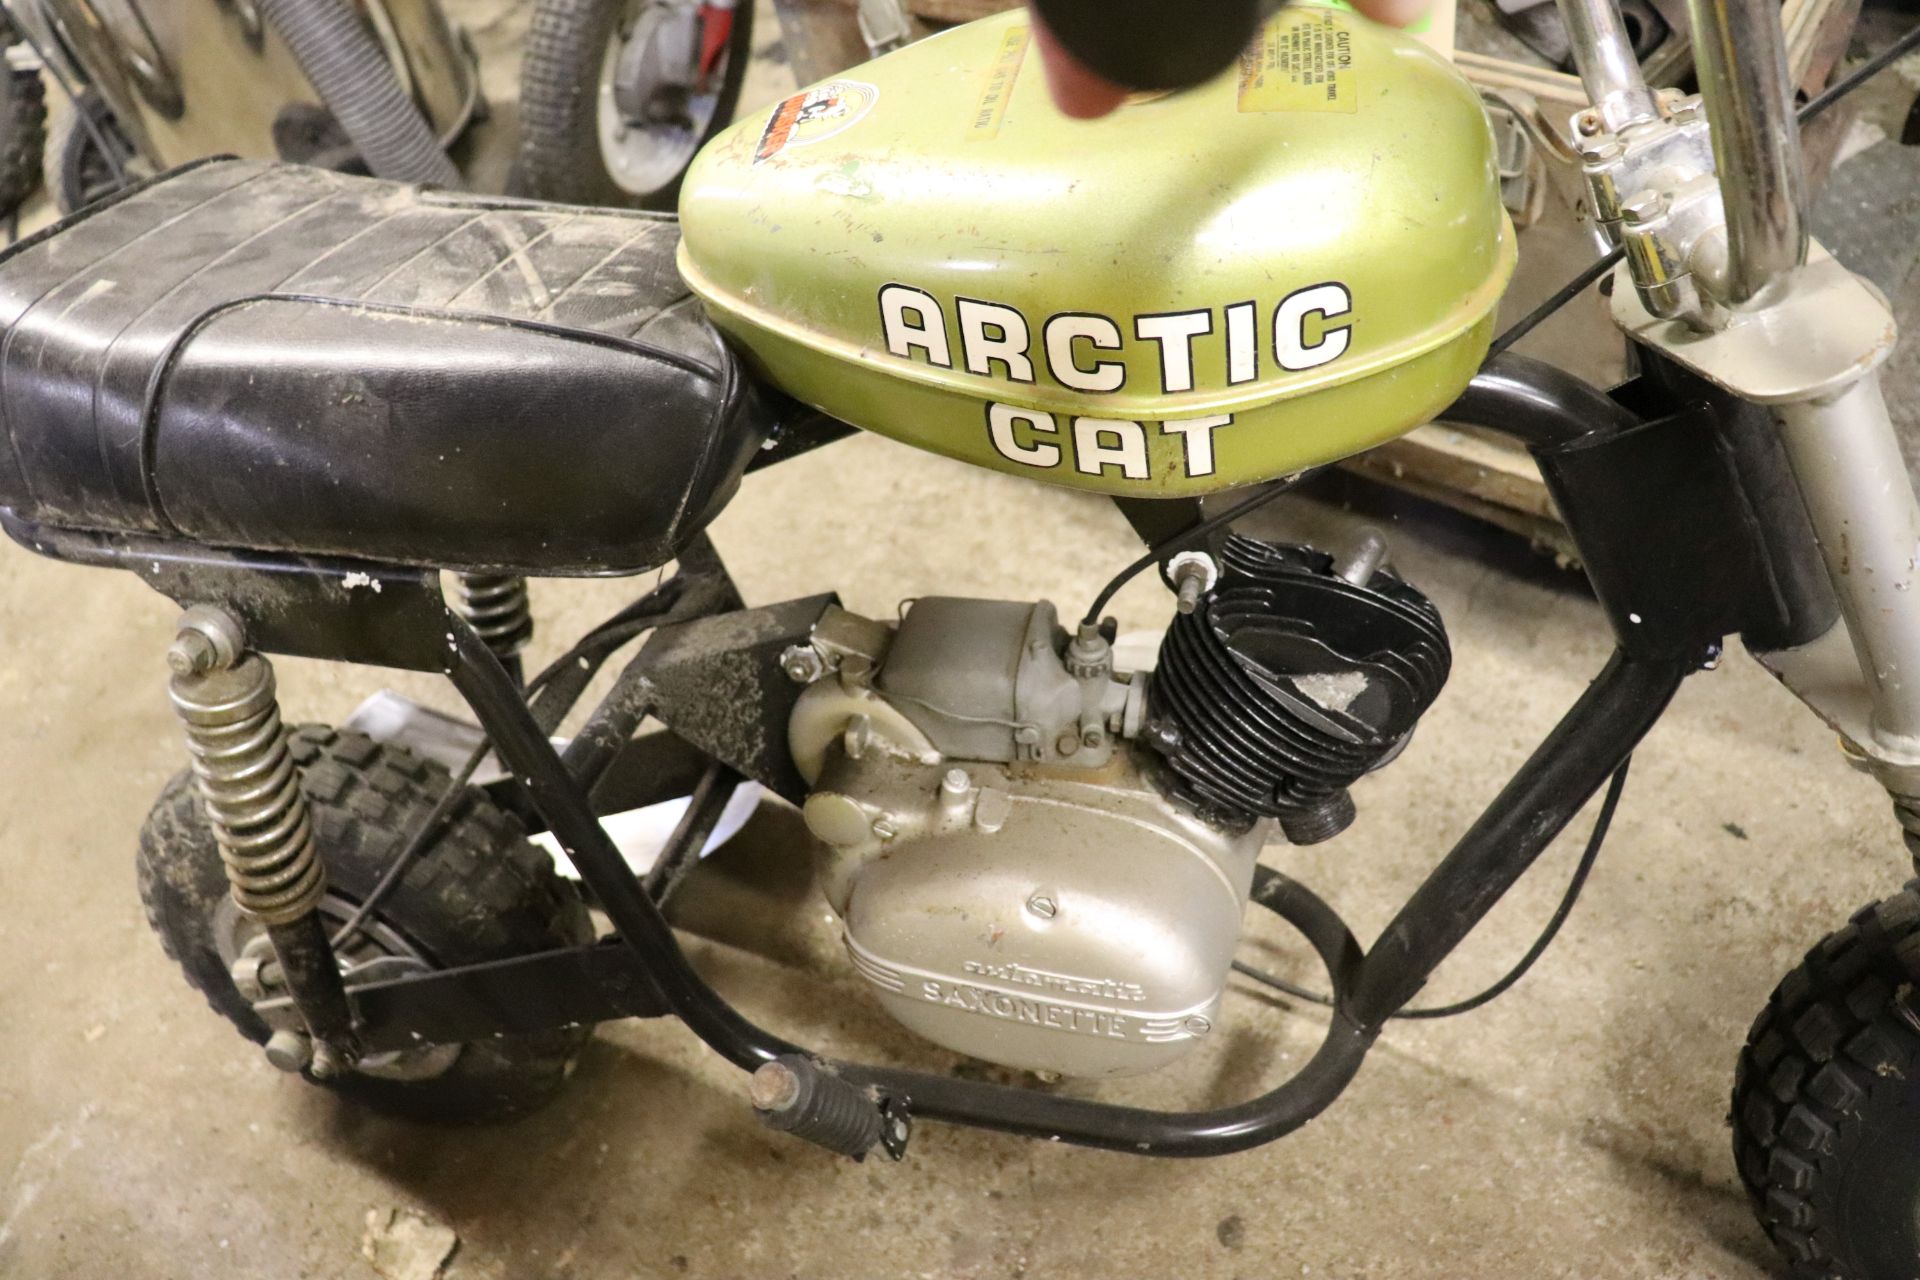 1971 Arctic Cat Whisker, model 2328-001 MINI BIKES MARKED AS PARTS BIKES, NOT OPERATIONAL, CONDITION - Image 3 of 5